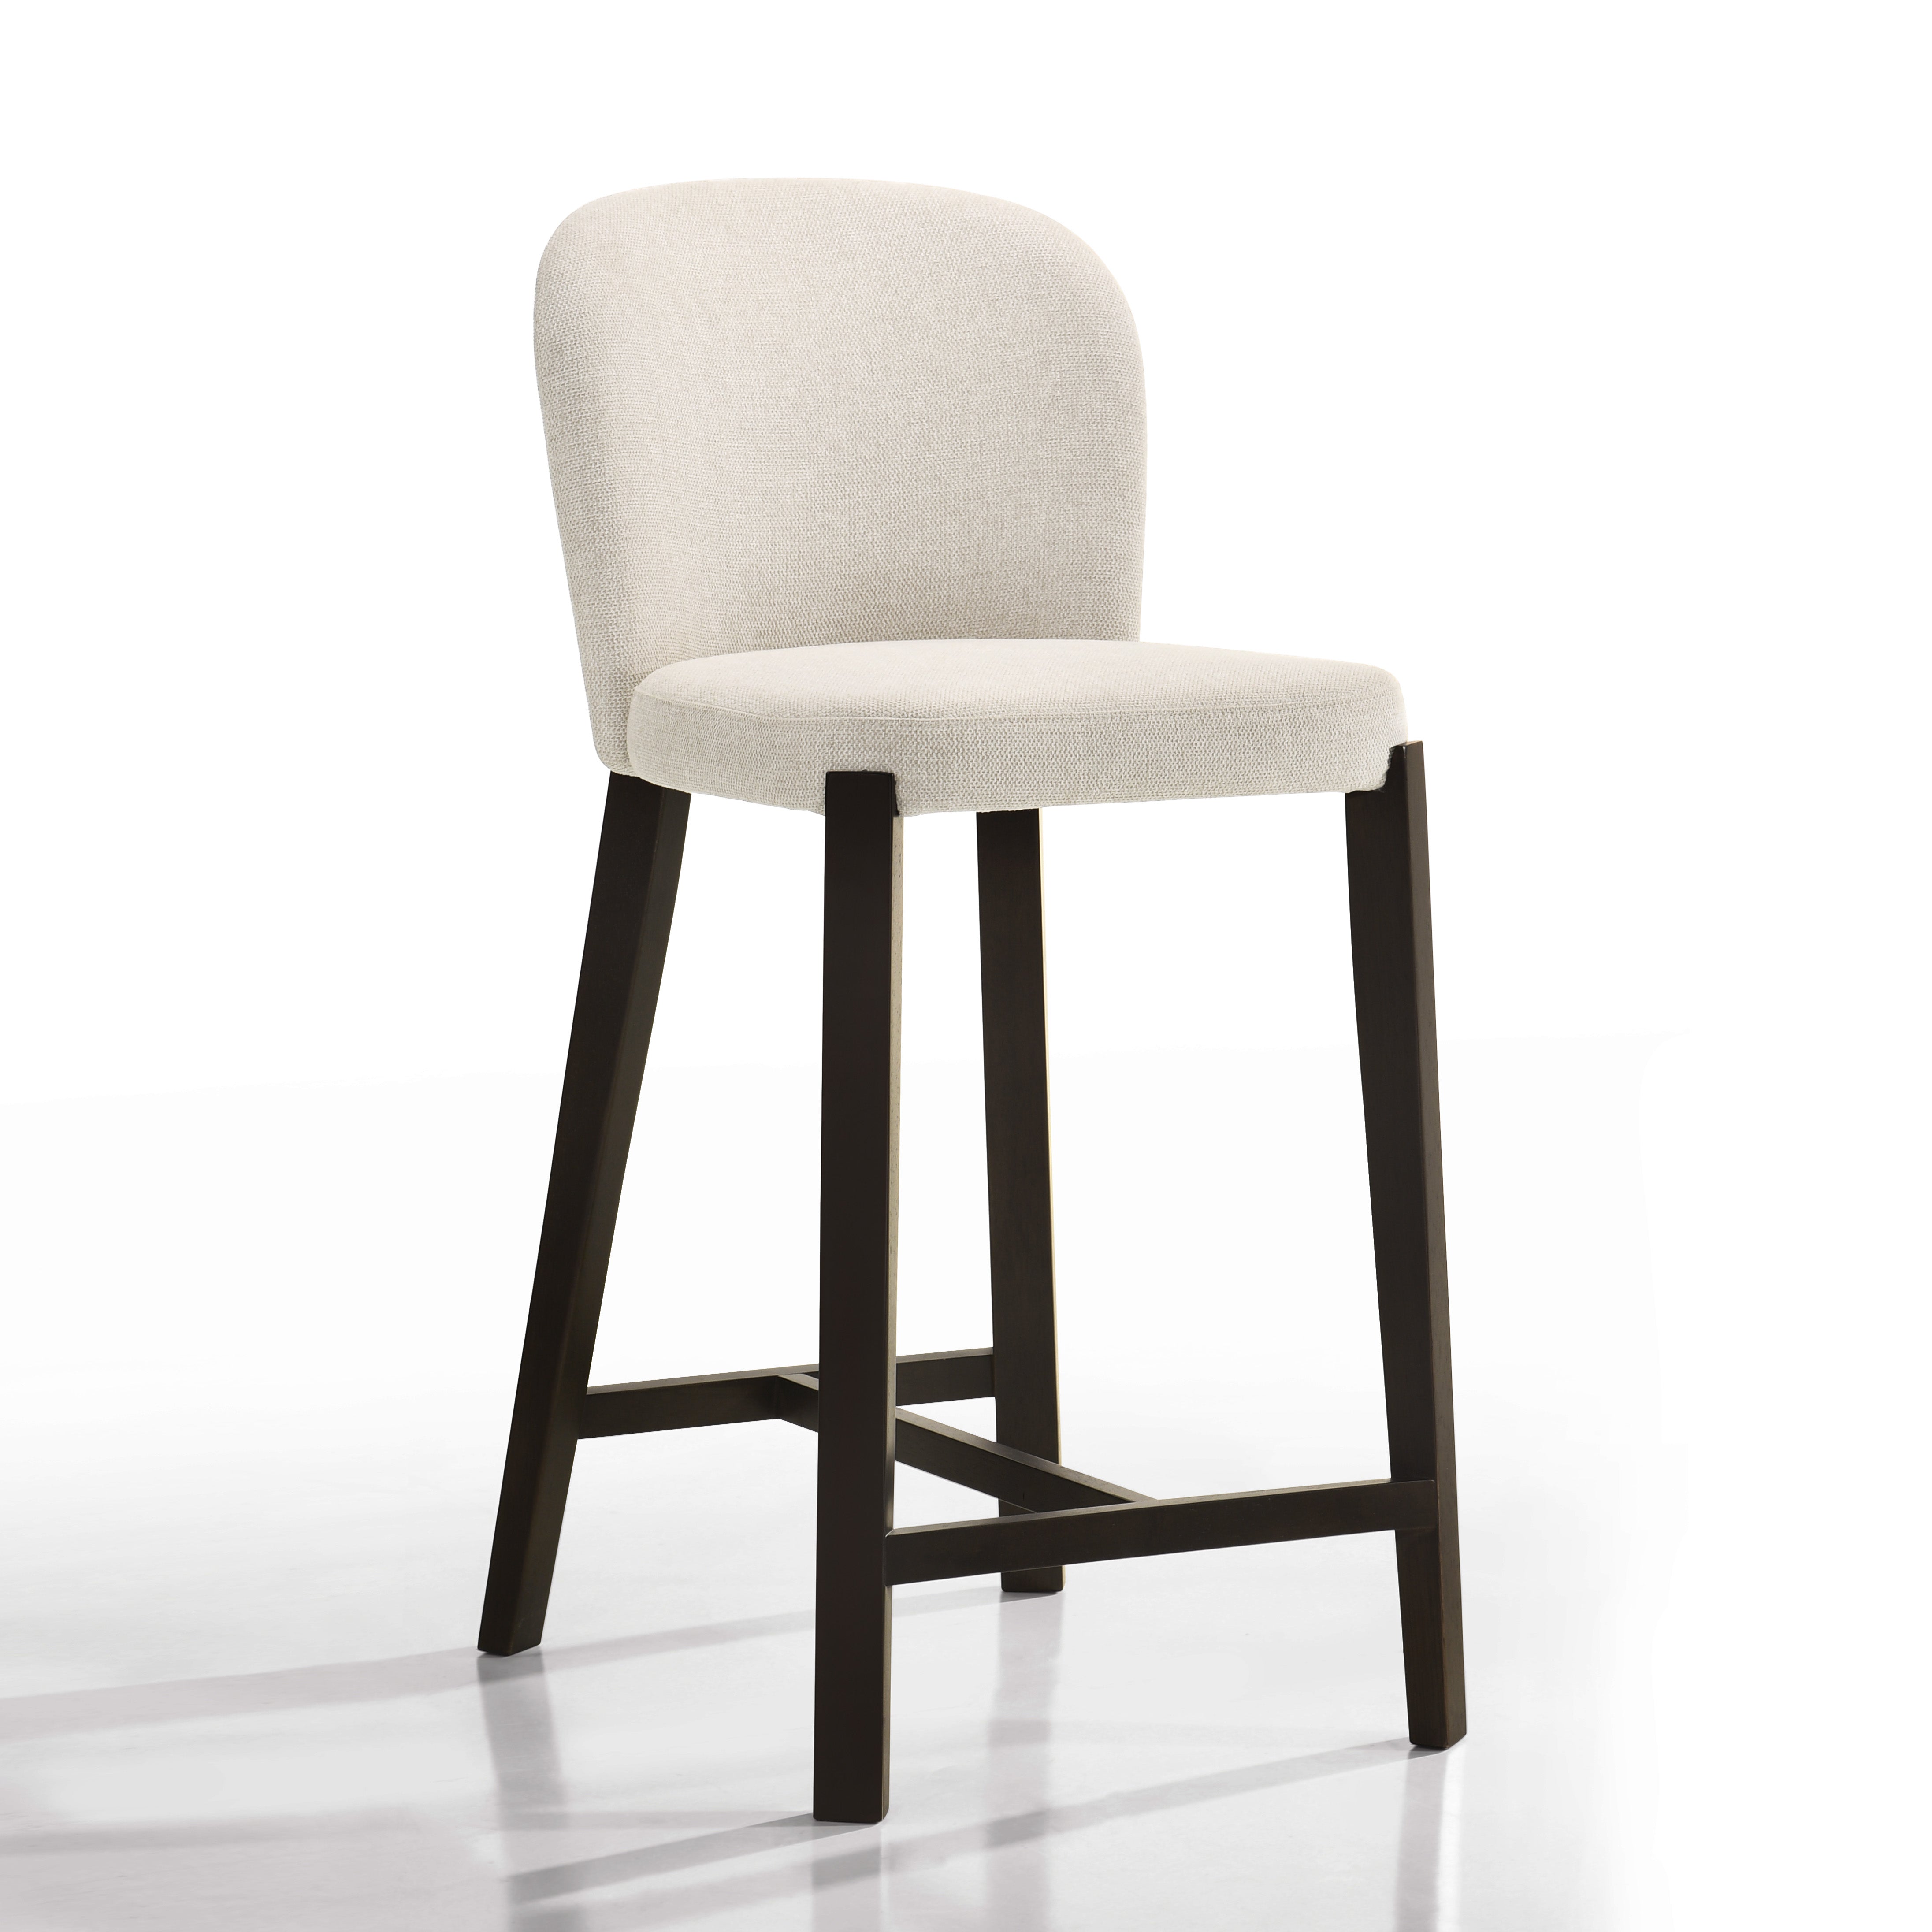 Larsen 26" Solid Wood and Fabric Counter Stool, Oatmeal Beige